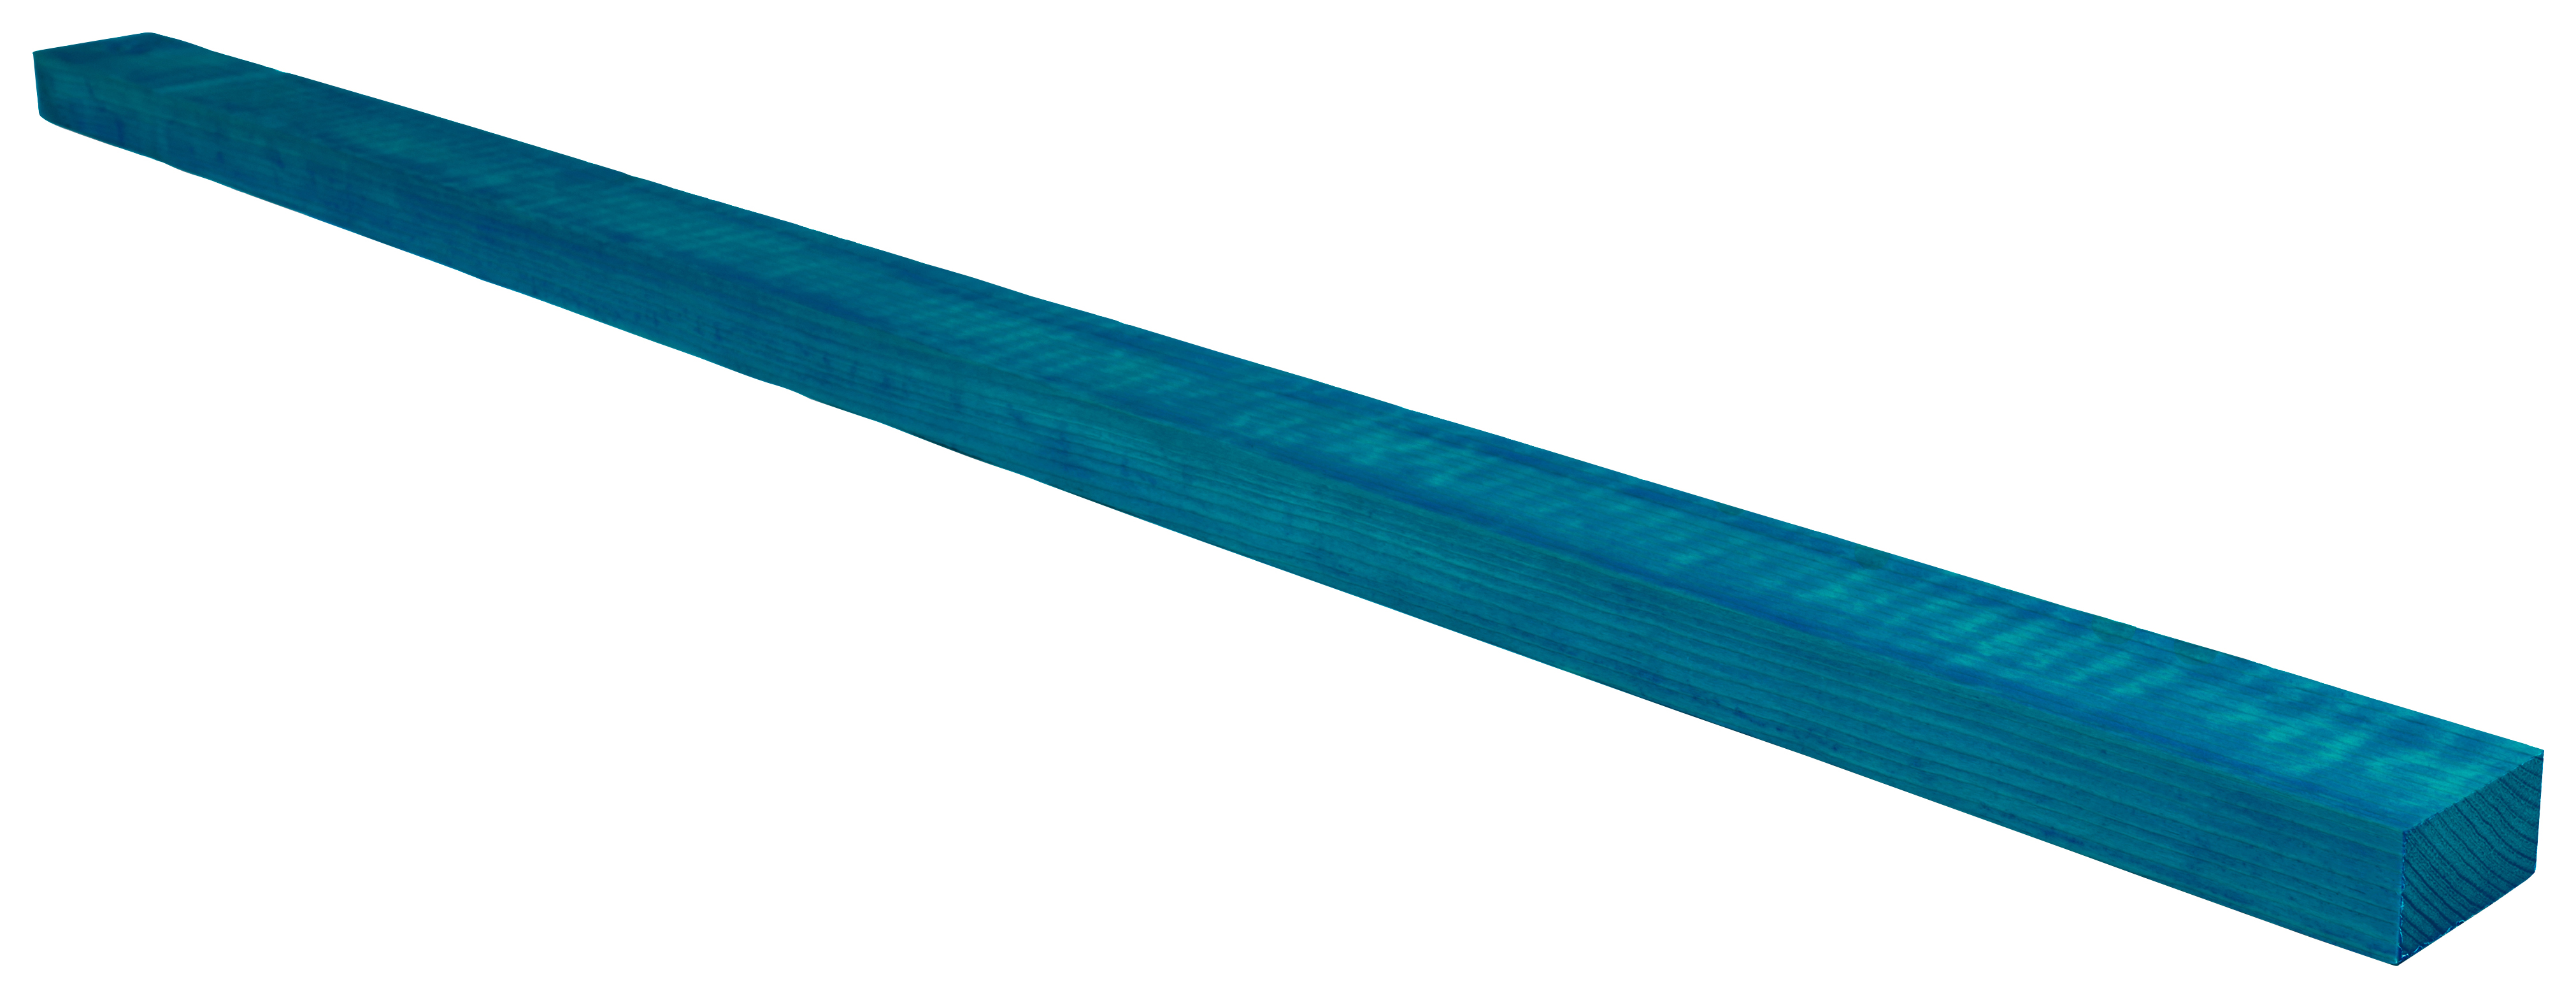 Wickes Treated Timber Roof Batten - 25 x 38 x 3600mm - Pack of 80